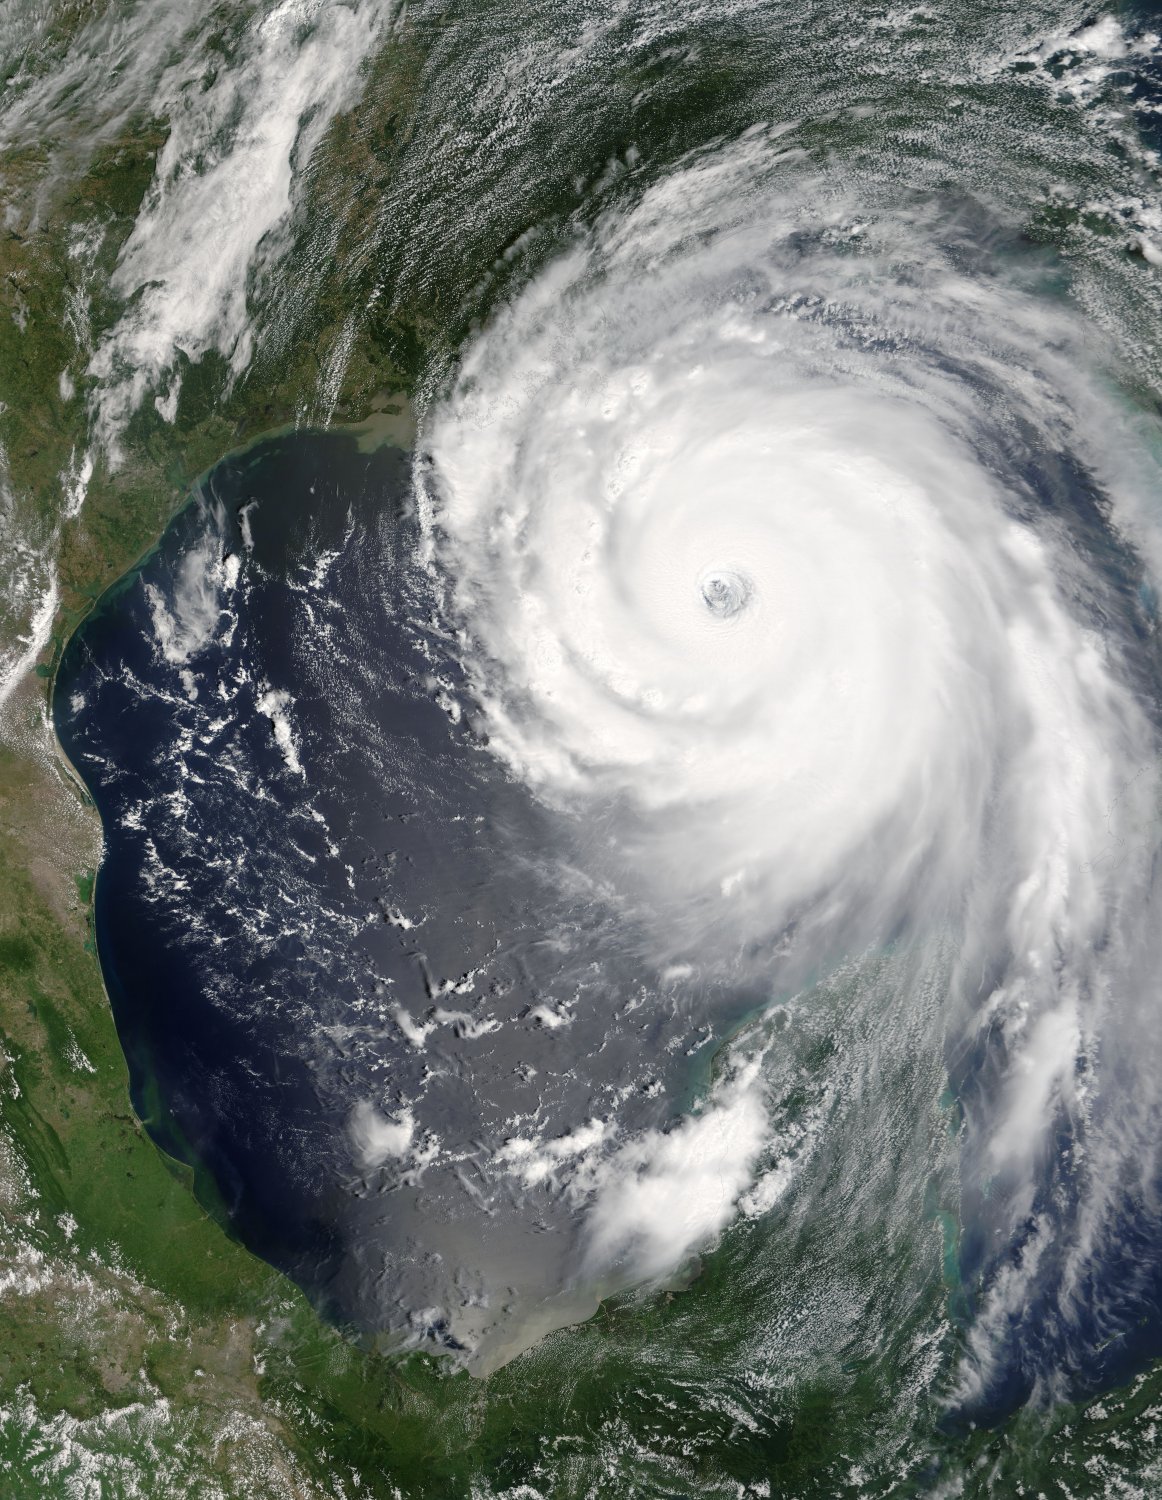 Hurricane Katrina at peak intensity in the Gulf of Mexico on August 28, 2005